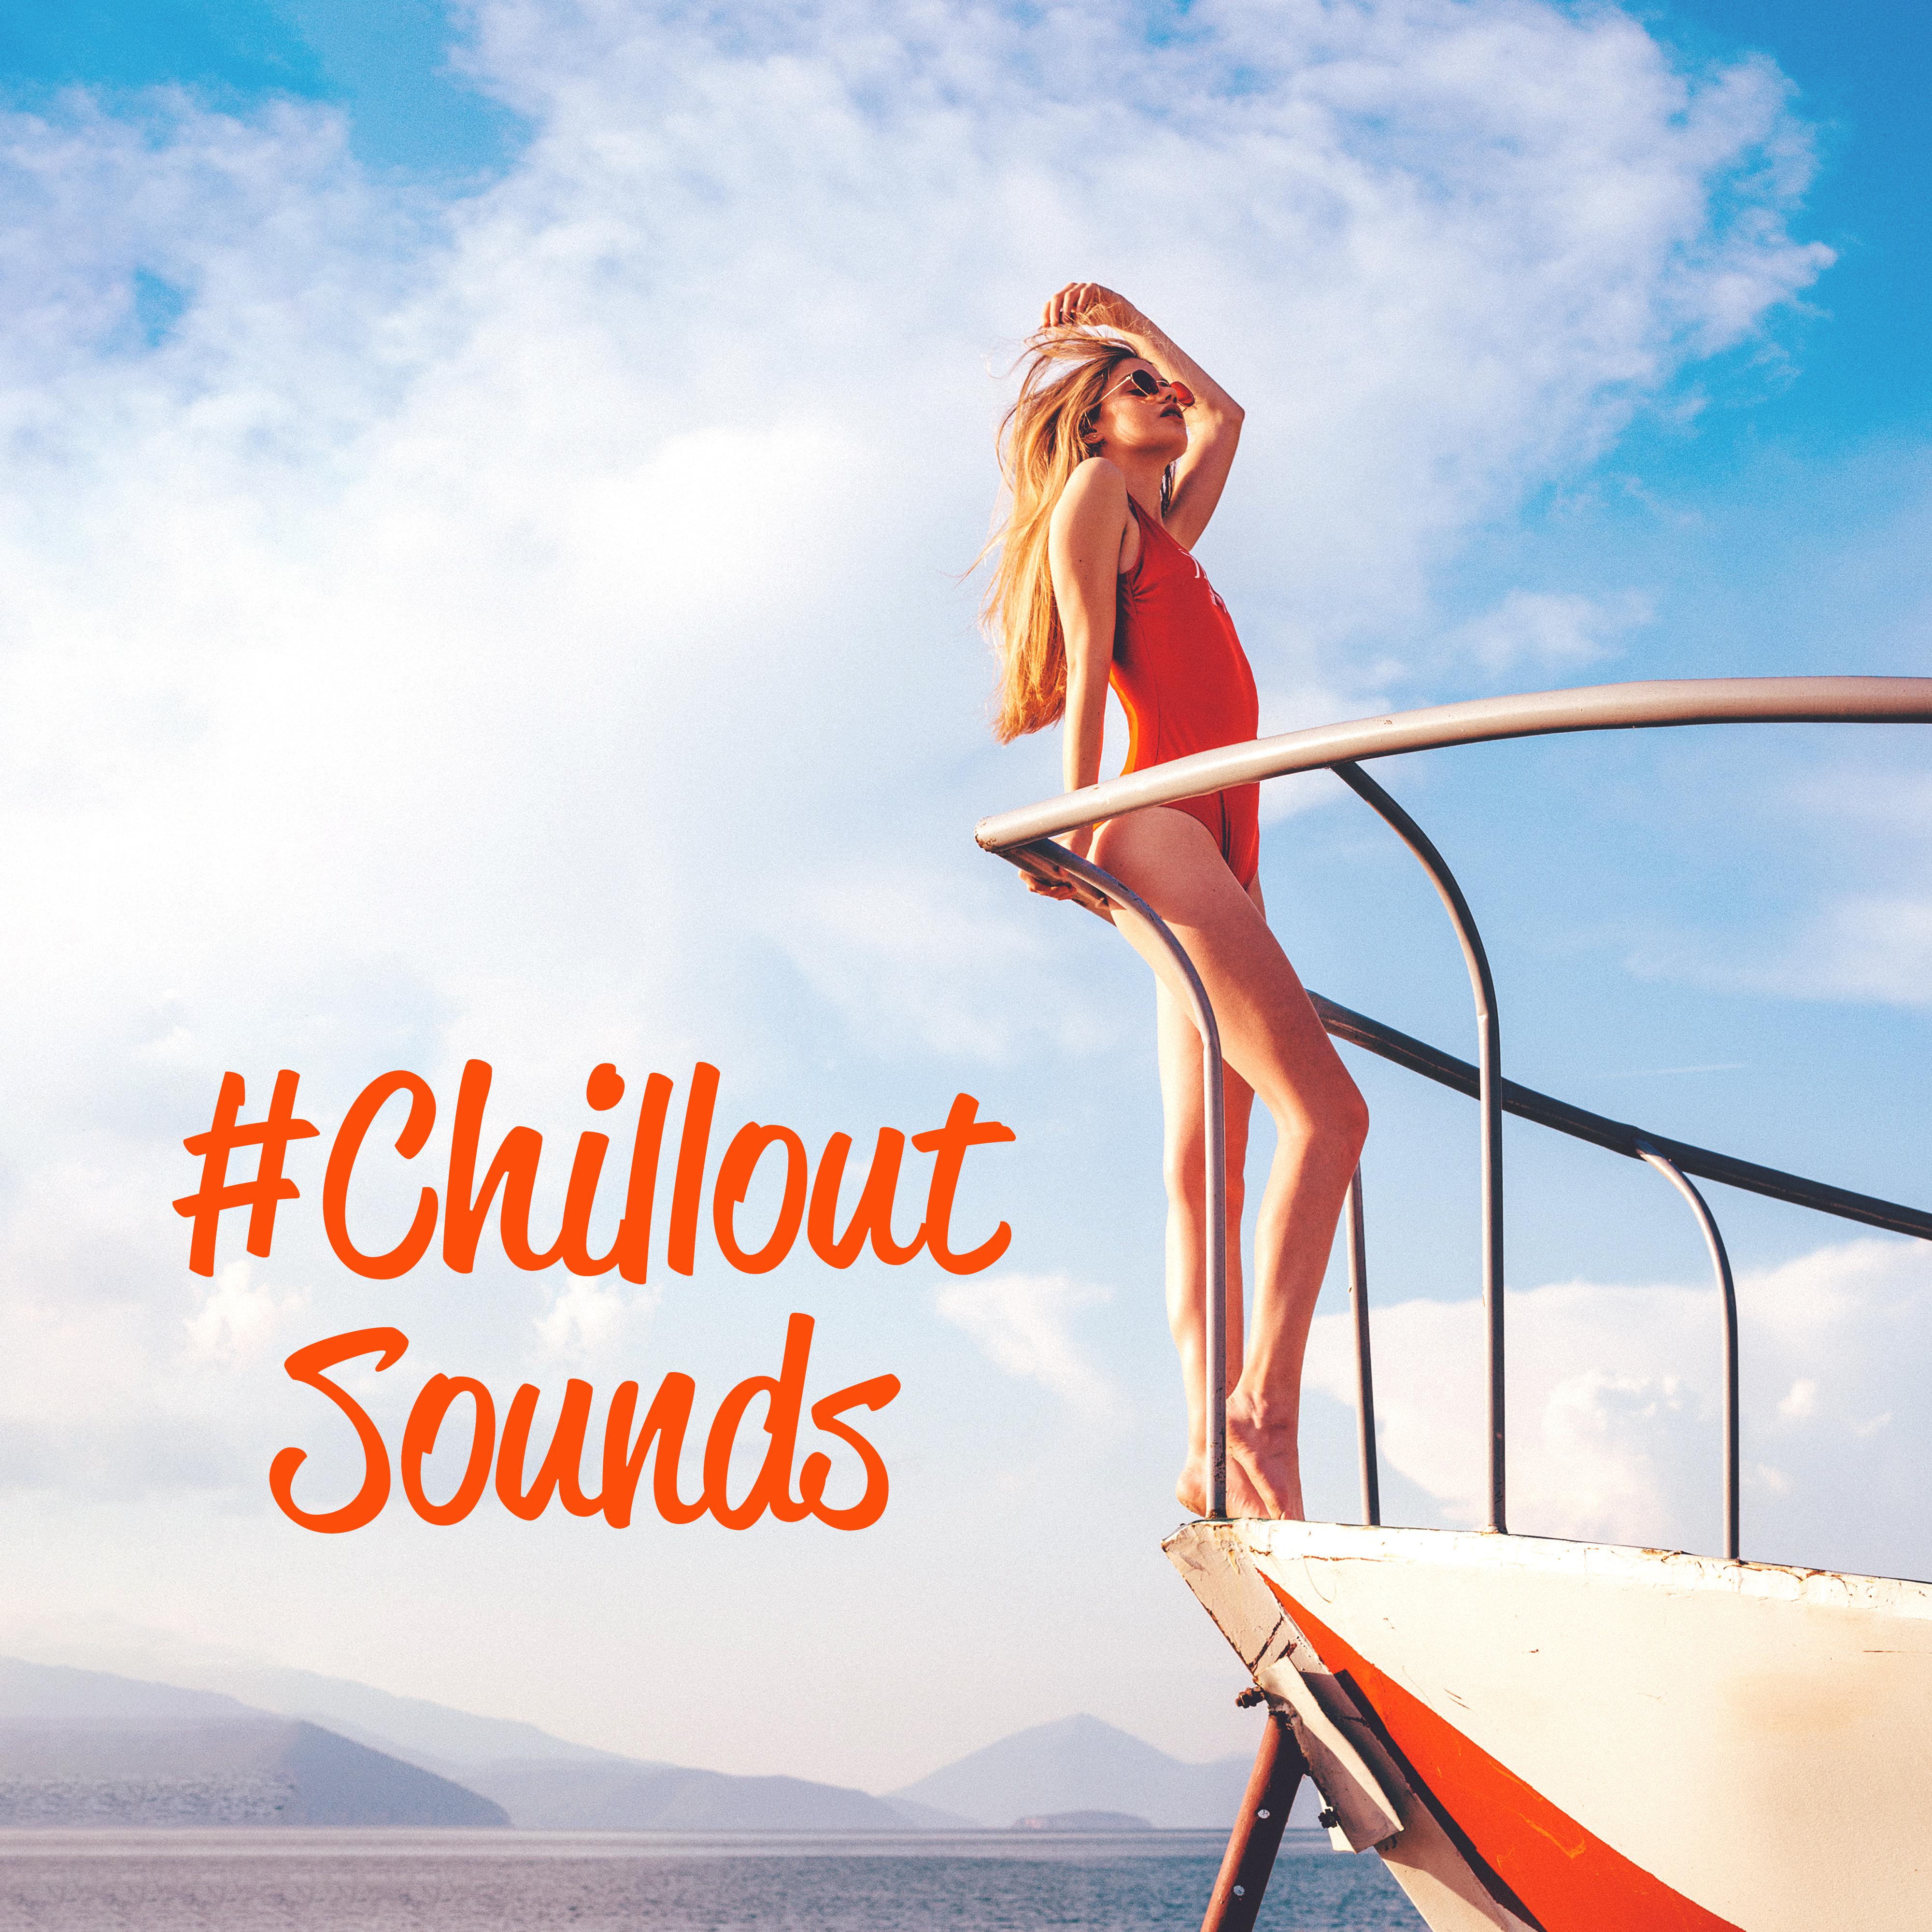 #Chillout Sounds